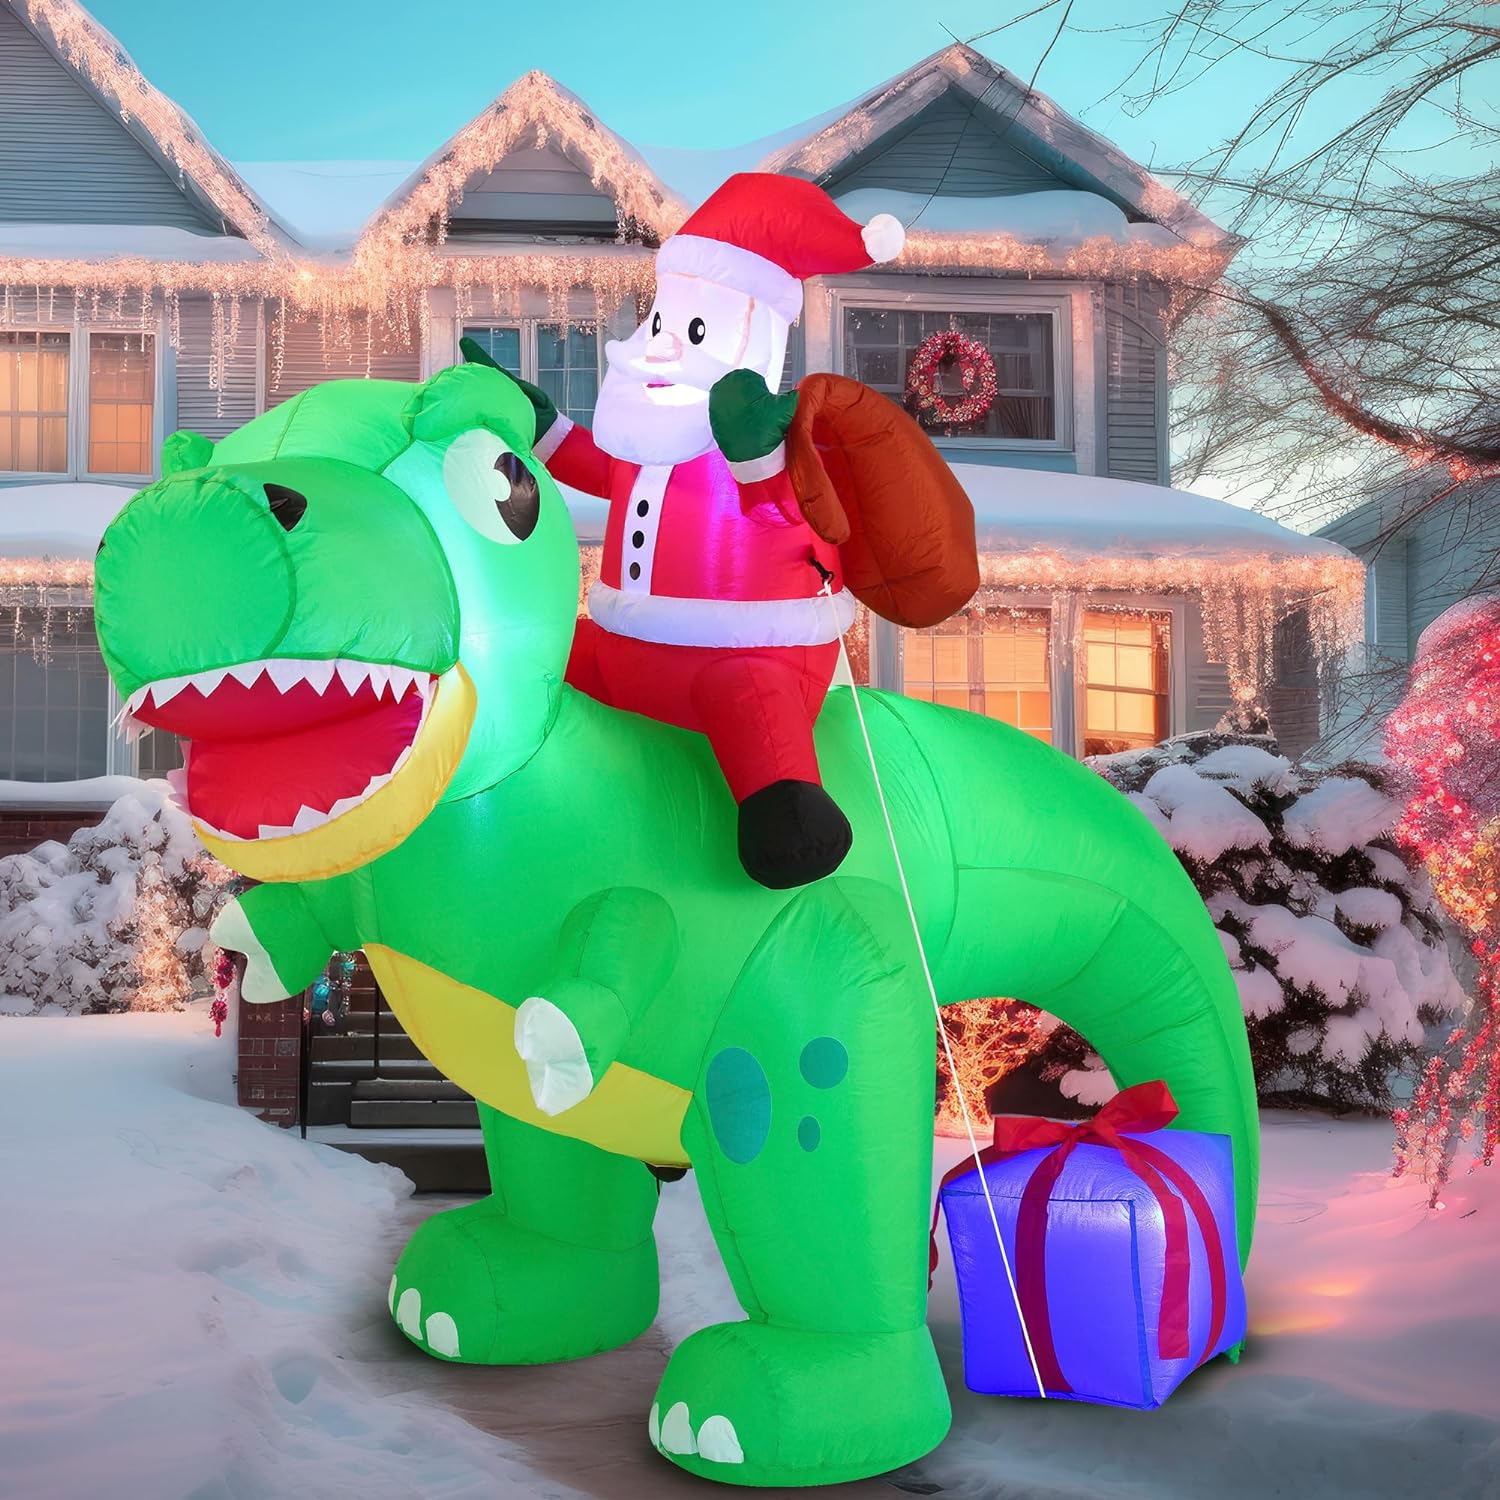 6 FT Christmas Inflatable Dinosaur with Build-In Leds, Blow up Dinosaur with San